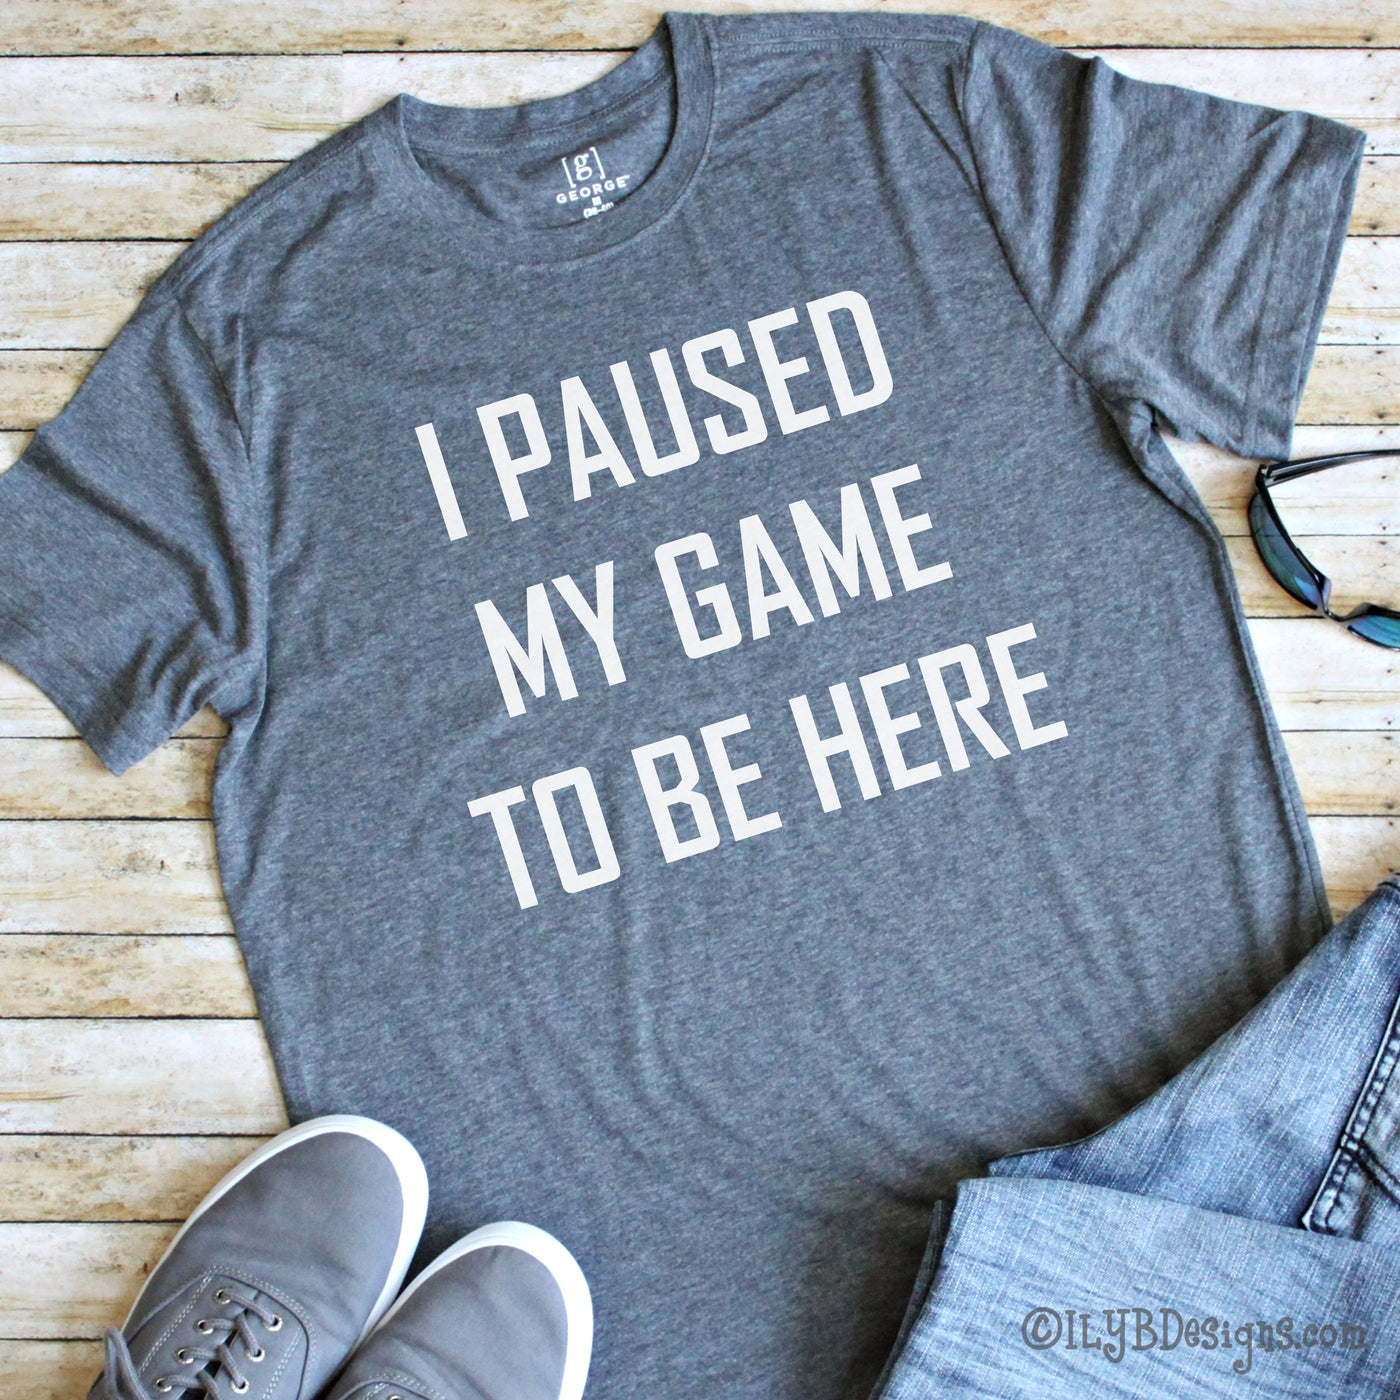 I Paused My Game to Be Here Men's Gaming Shirt - Men's Gaming Shirt - Funny Video Gamer Shirt - Men's Funny Tee - ILYB Designs